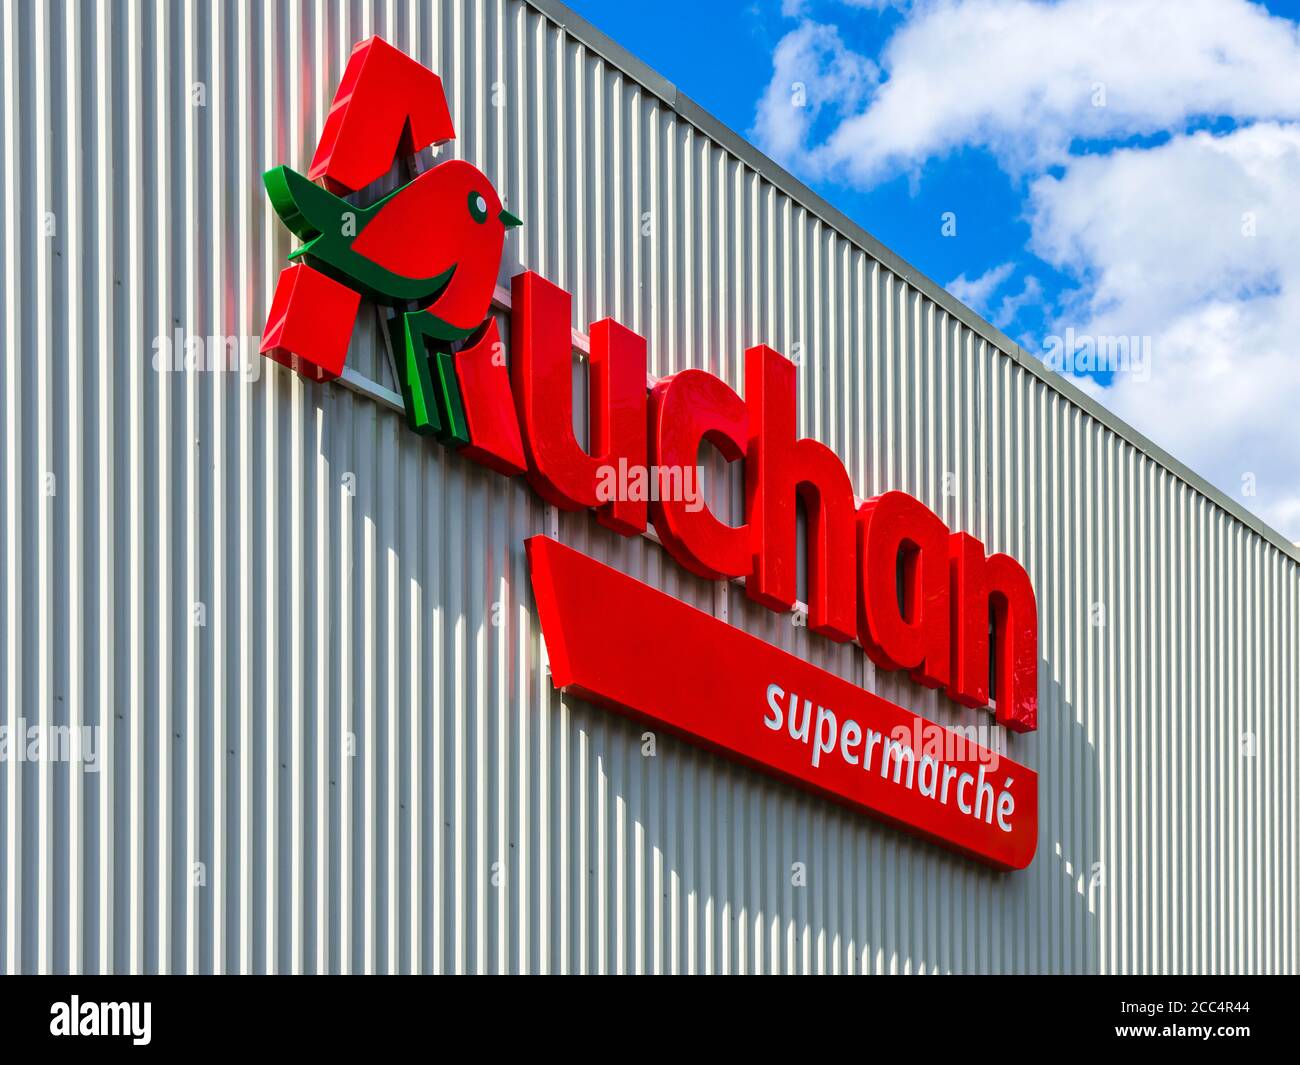 Auchan corporate logo on side of store - Ligueil, Indre-et-Loire, France. Stock Photo